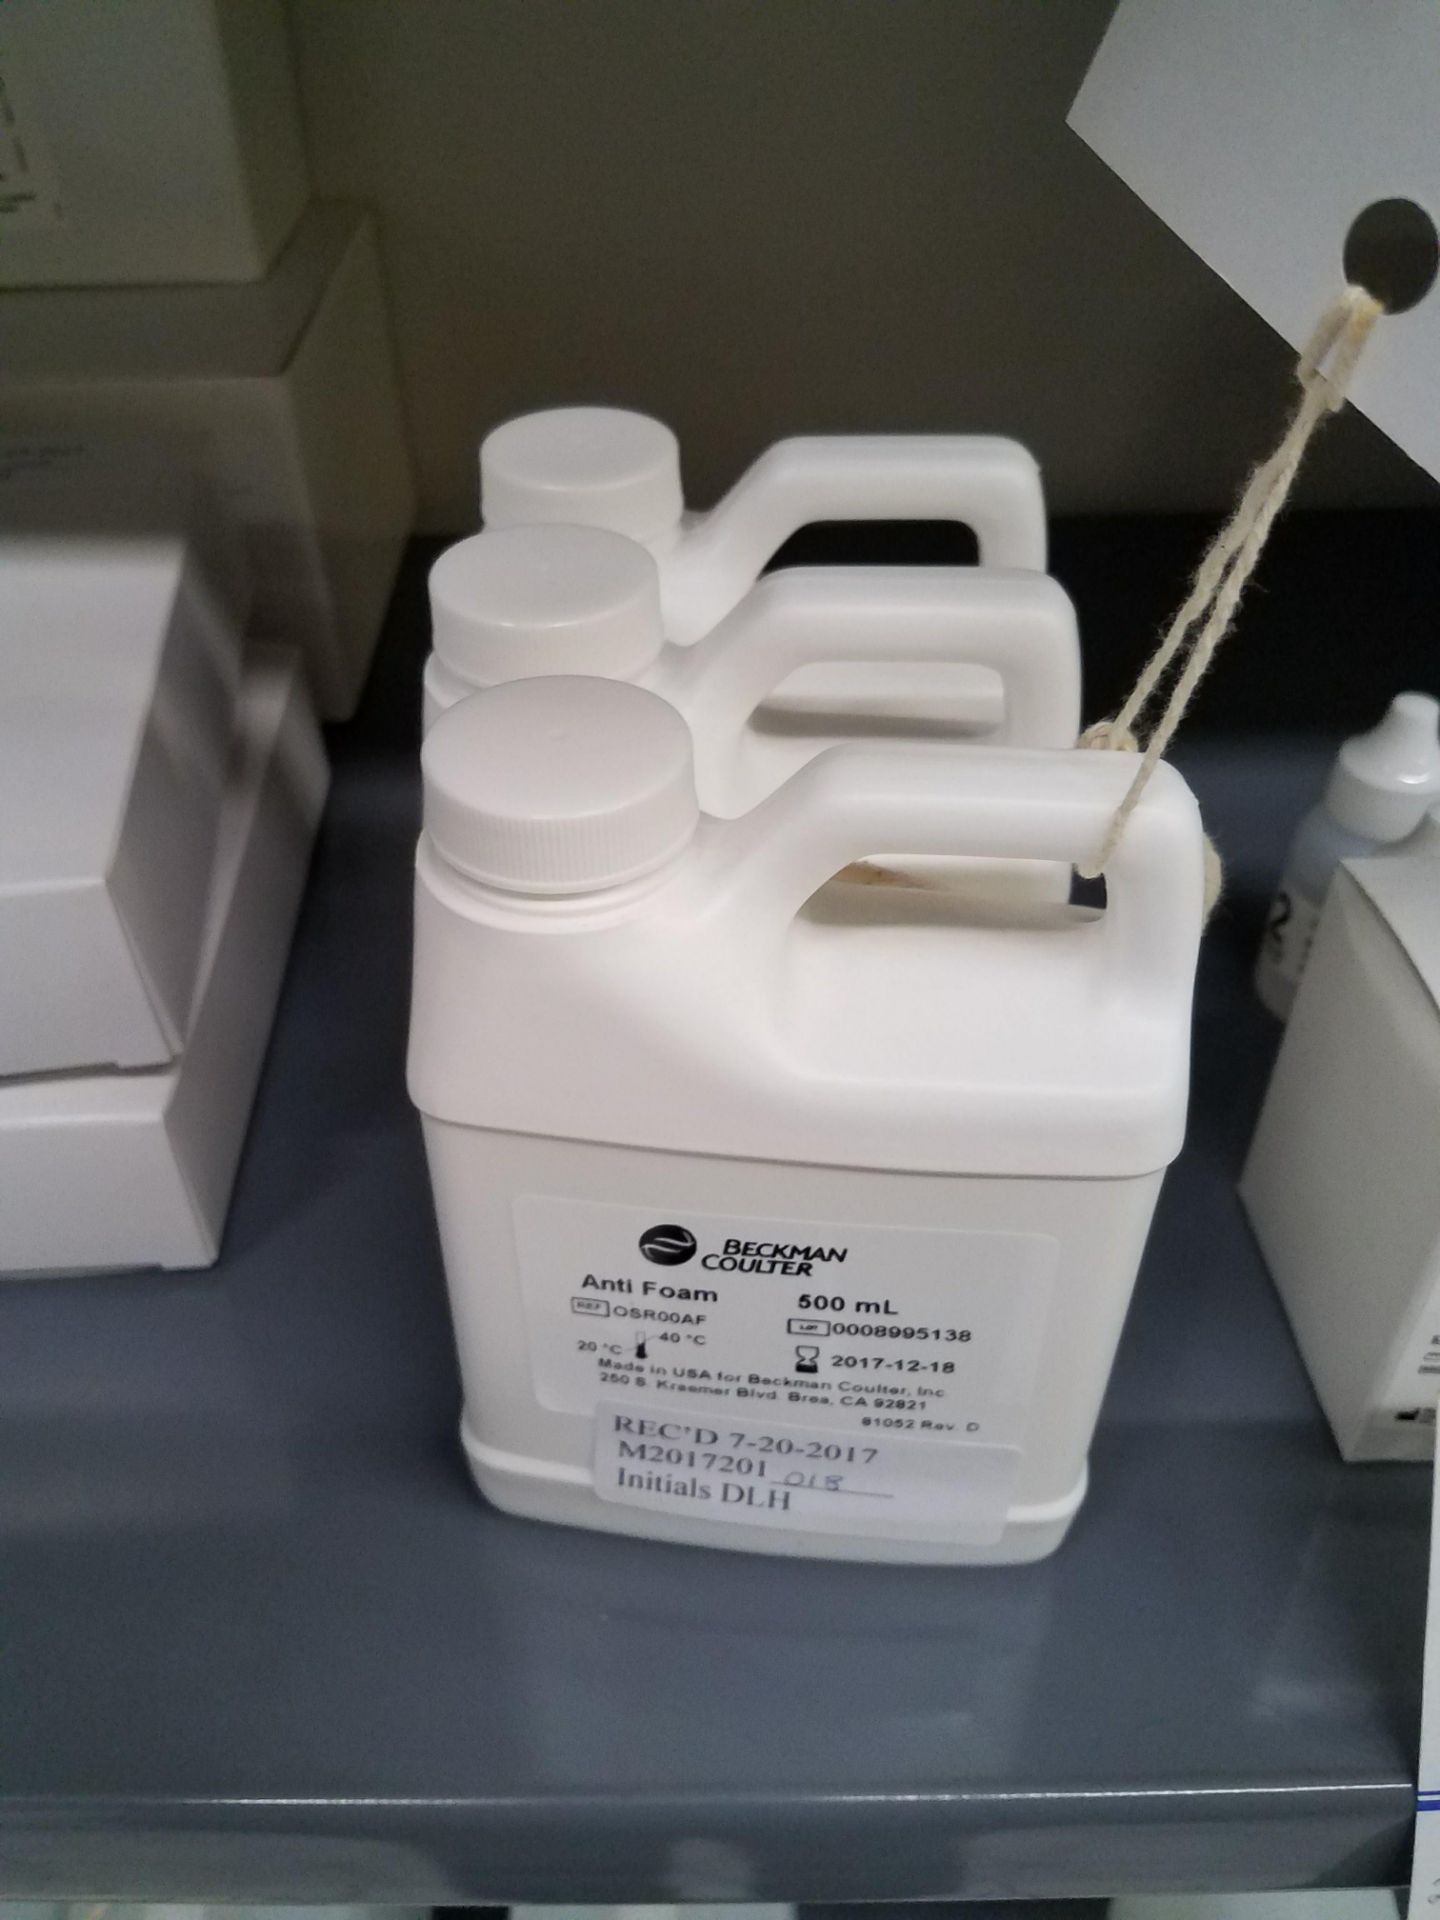 3 BOTTLES OF BECKMAN COULTER 500ML ANTI FOAM - Image 2 of 3